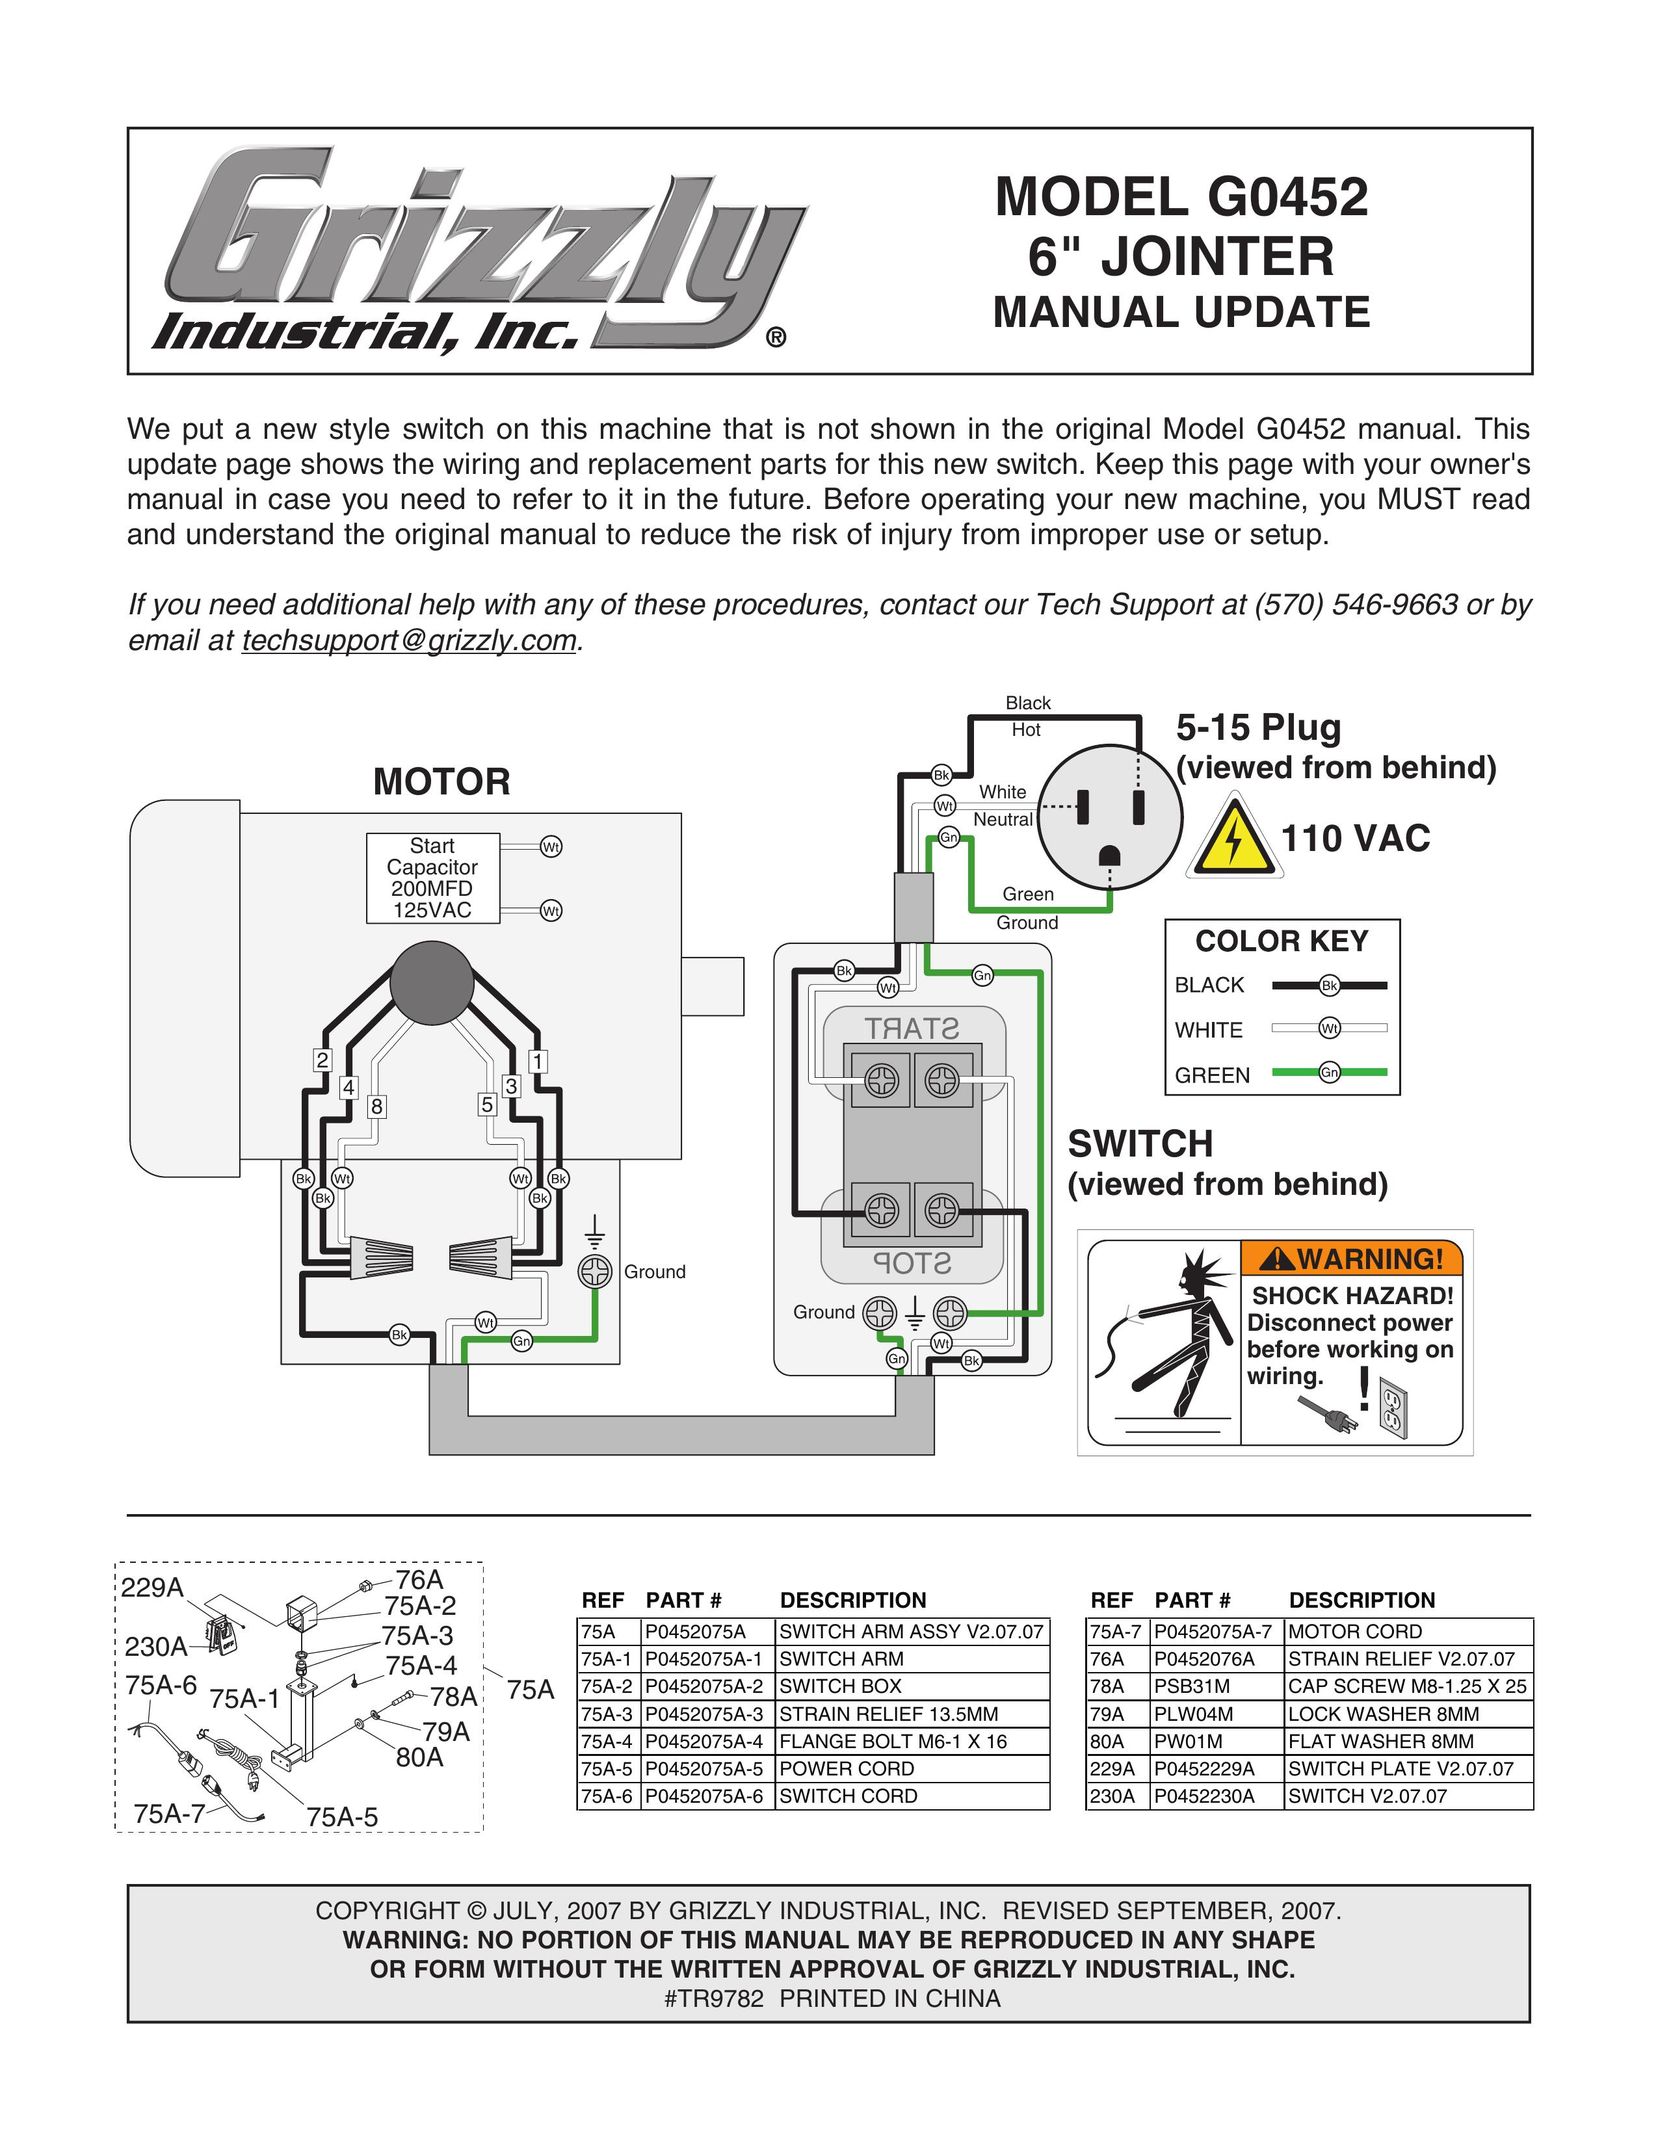 Grizzly G0452 Biscuit Joiner User Manual